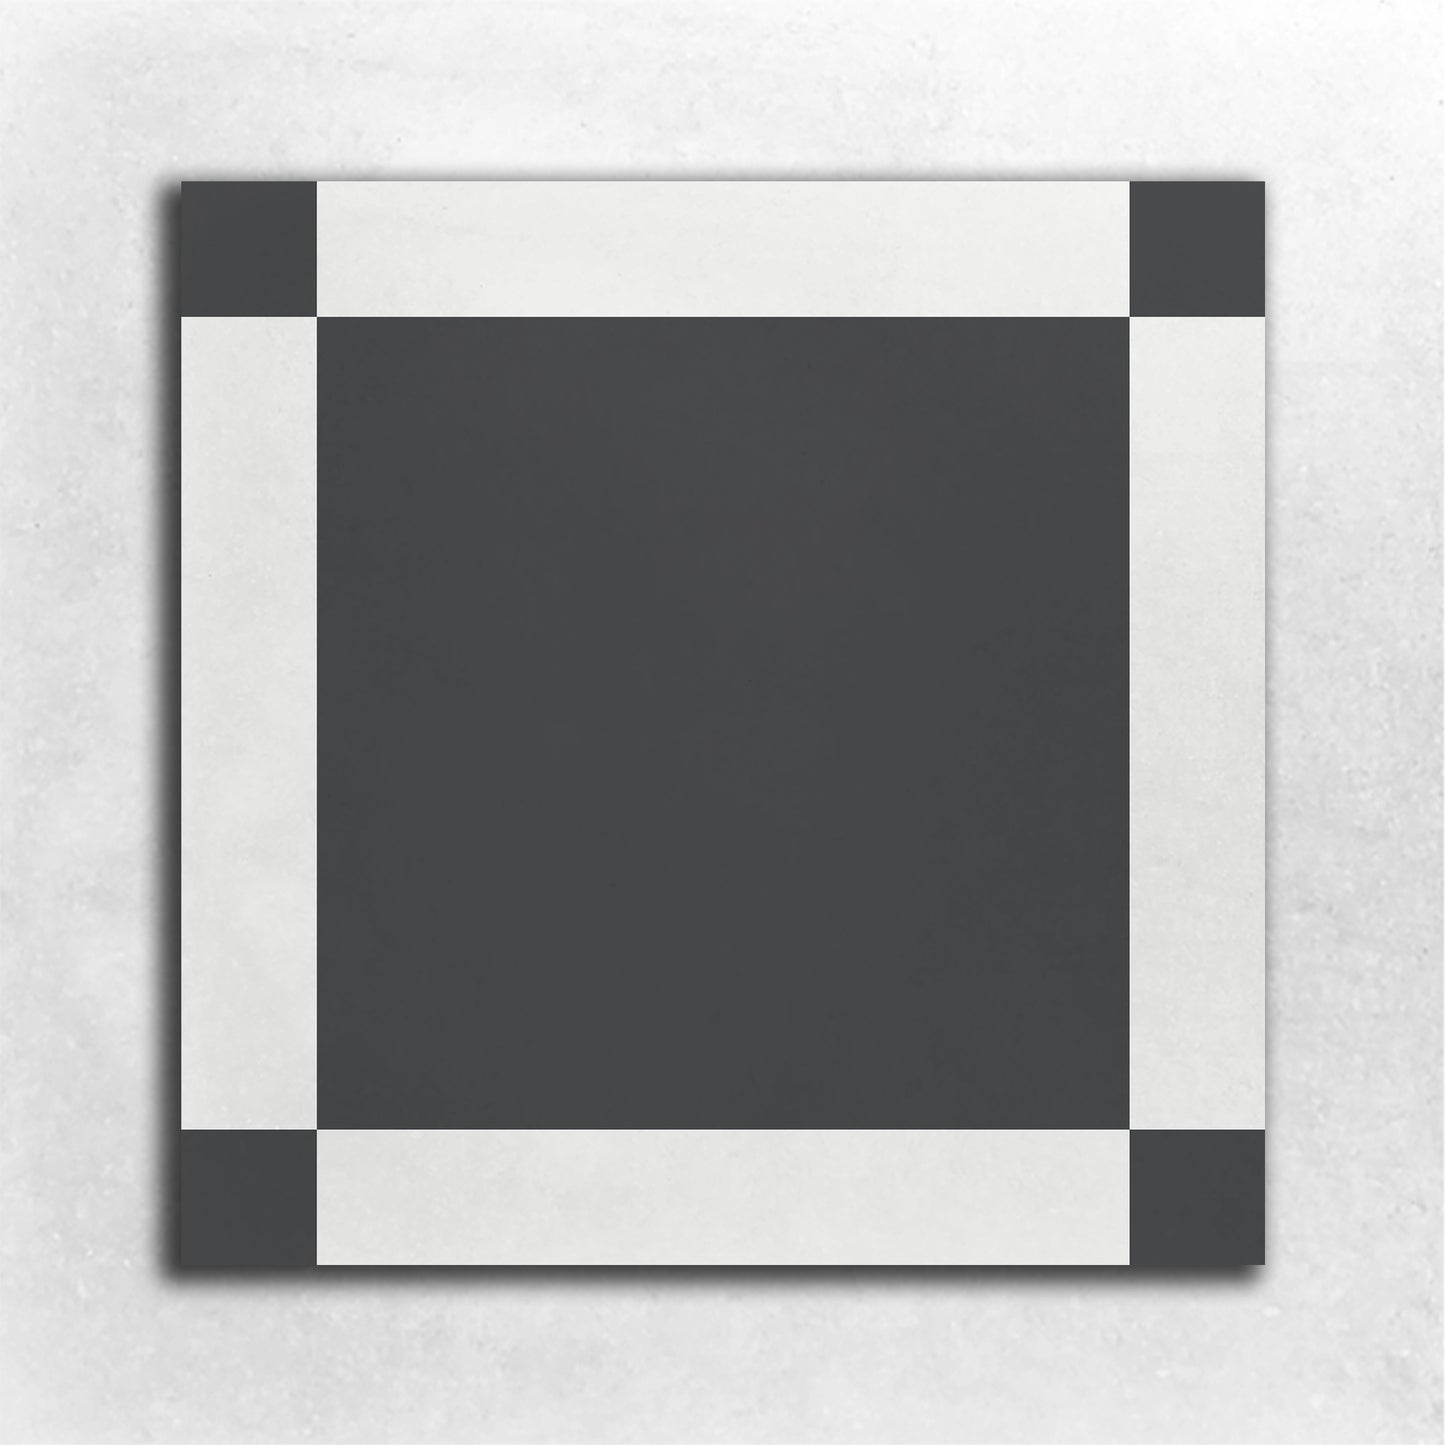 8x8 cement tile pattern with dots in the corners in black and white